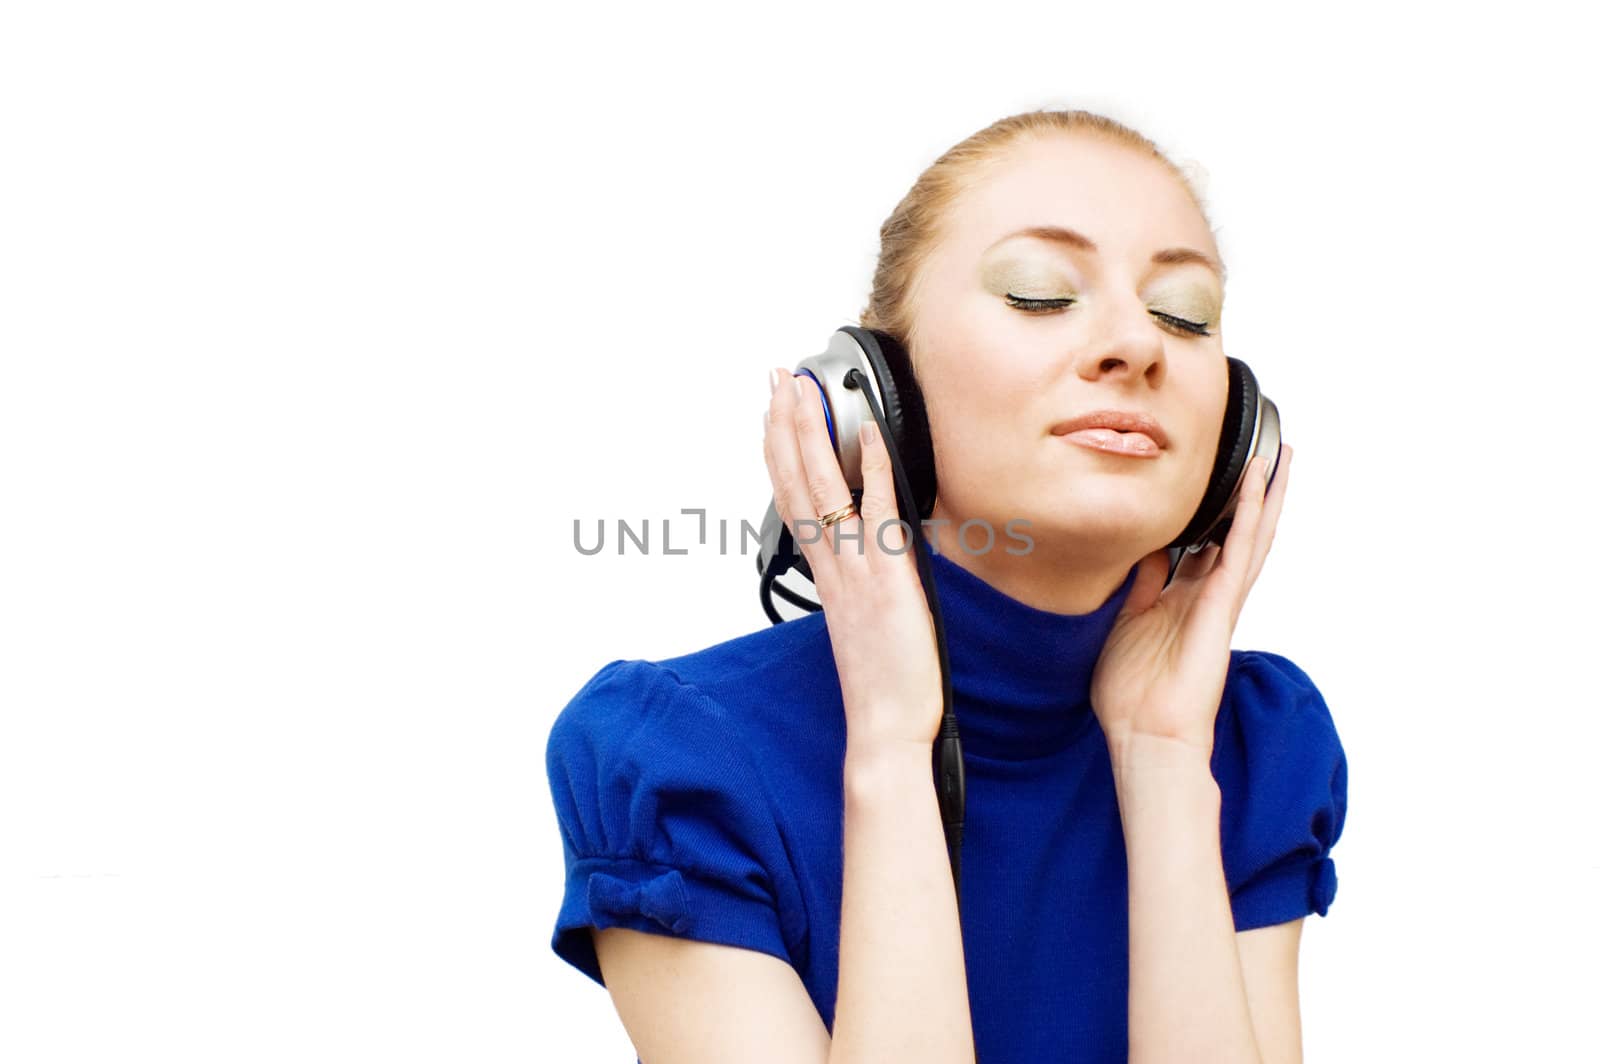 Redhead woman with headphones listenning to the music over white